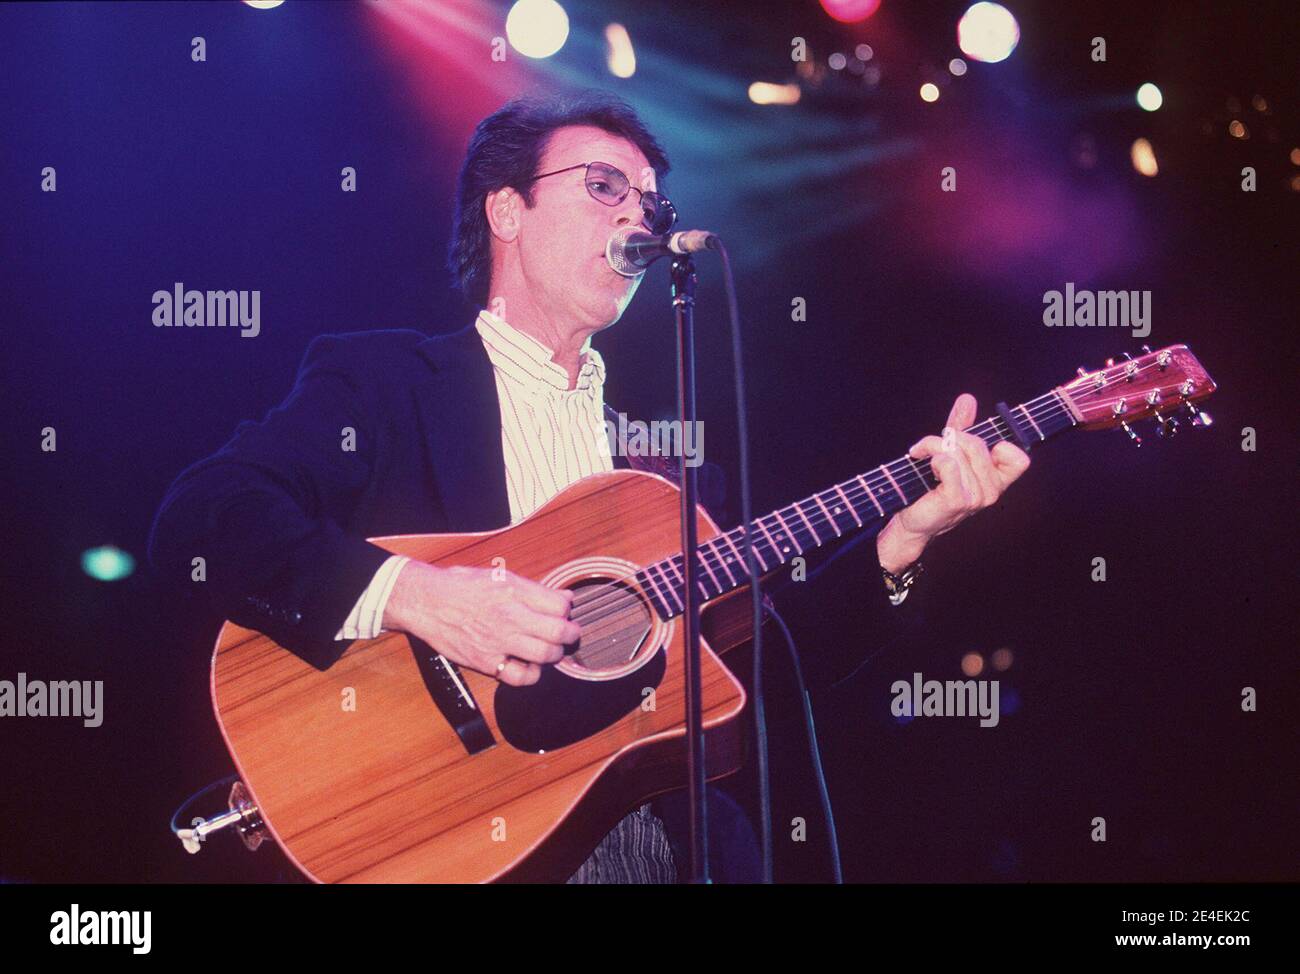 Sir Cliff Richard Performing at the 'Children In Crisis' Concert held at the London Docklands Arena, London, UK. 10th December 1997 Stock Photo